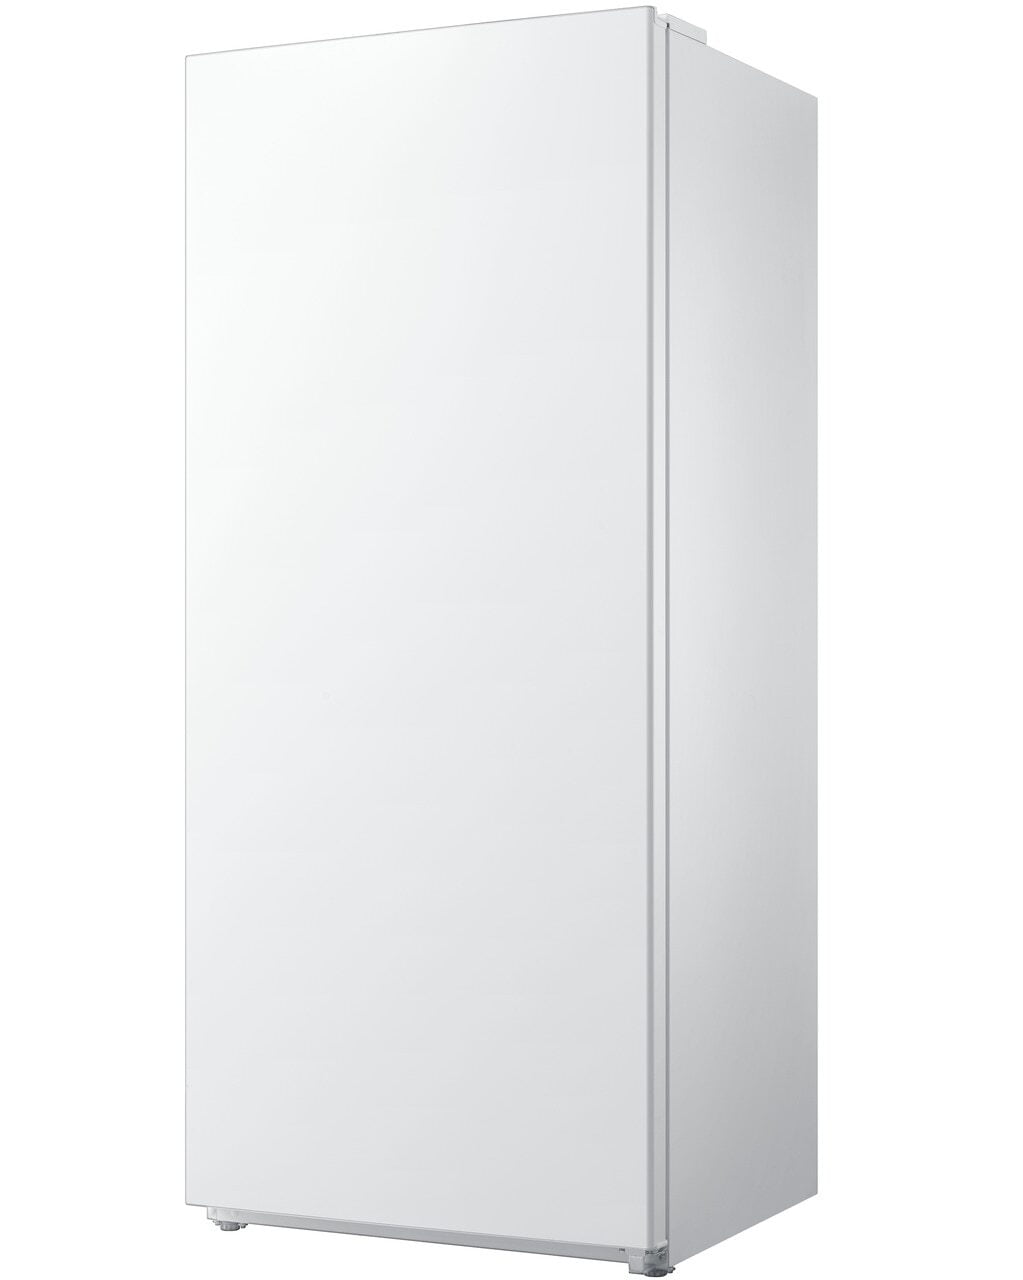 Frigidaire 20.0 cu. ft. Frost Free Upright Freezer in White